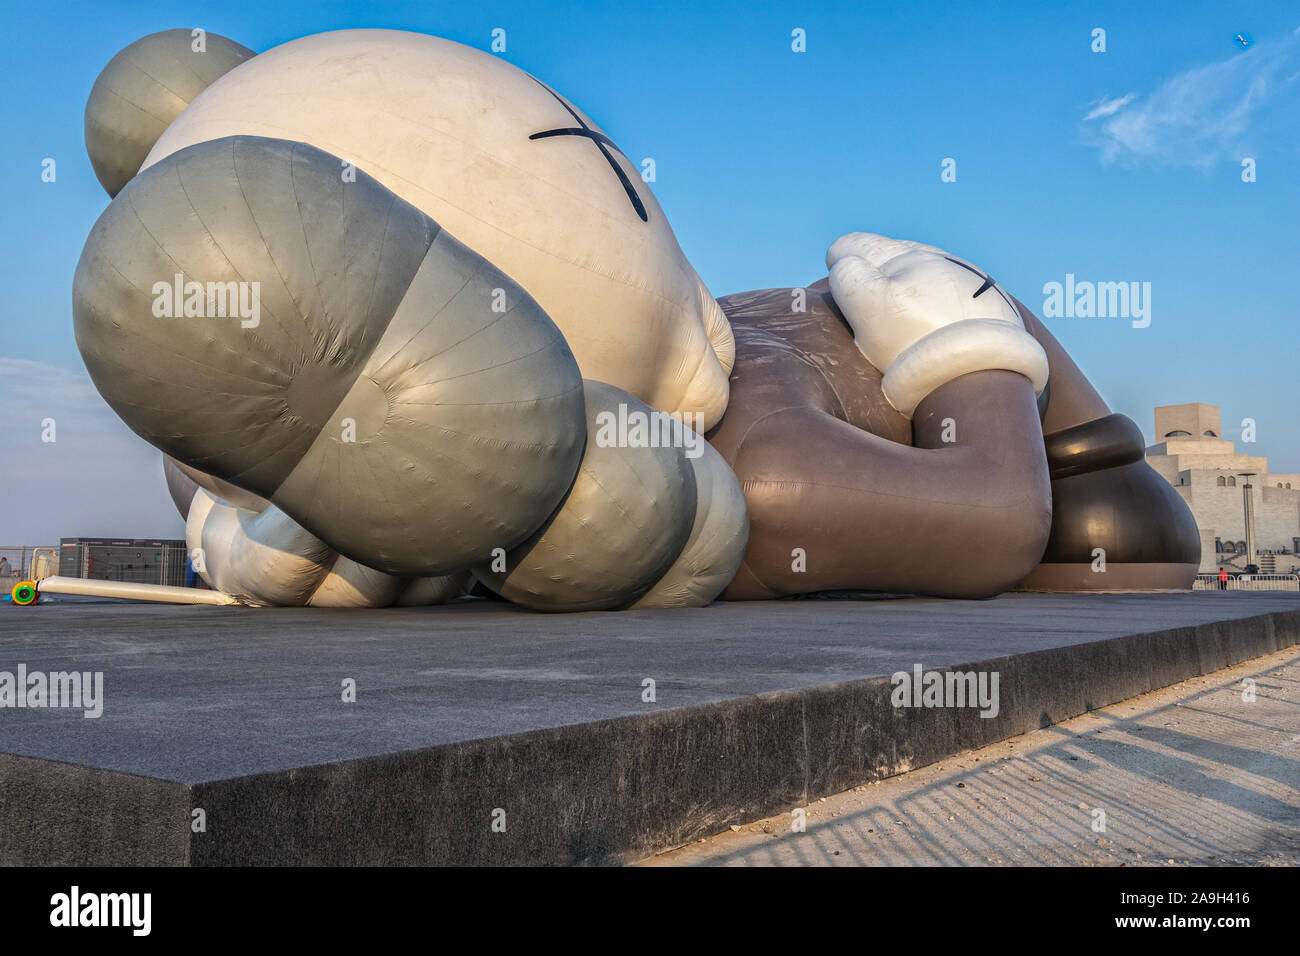 KAWS Holiday art installation in Doha Cor niche , Qatar Daylight view with clouds in sky Stock Photo